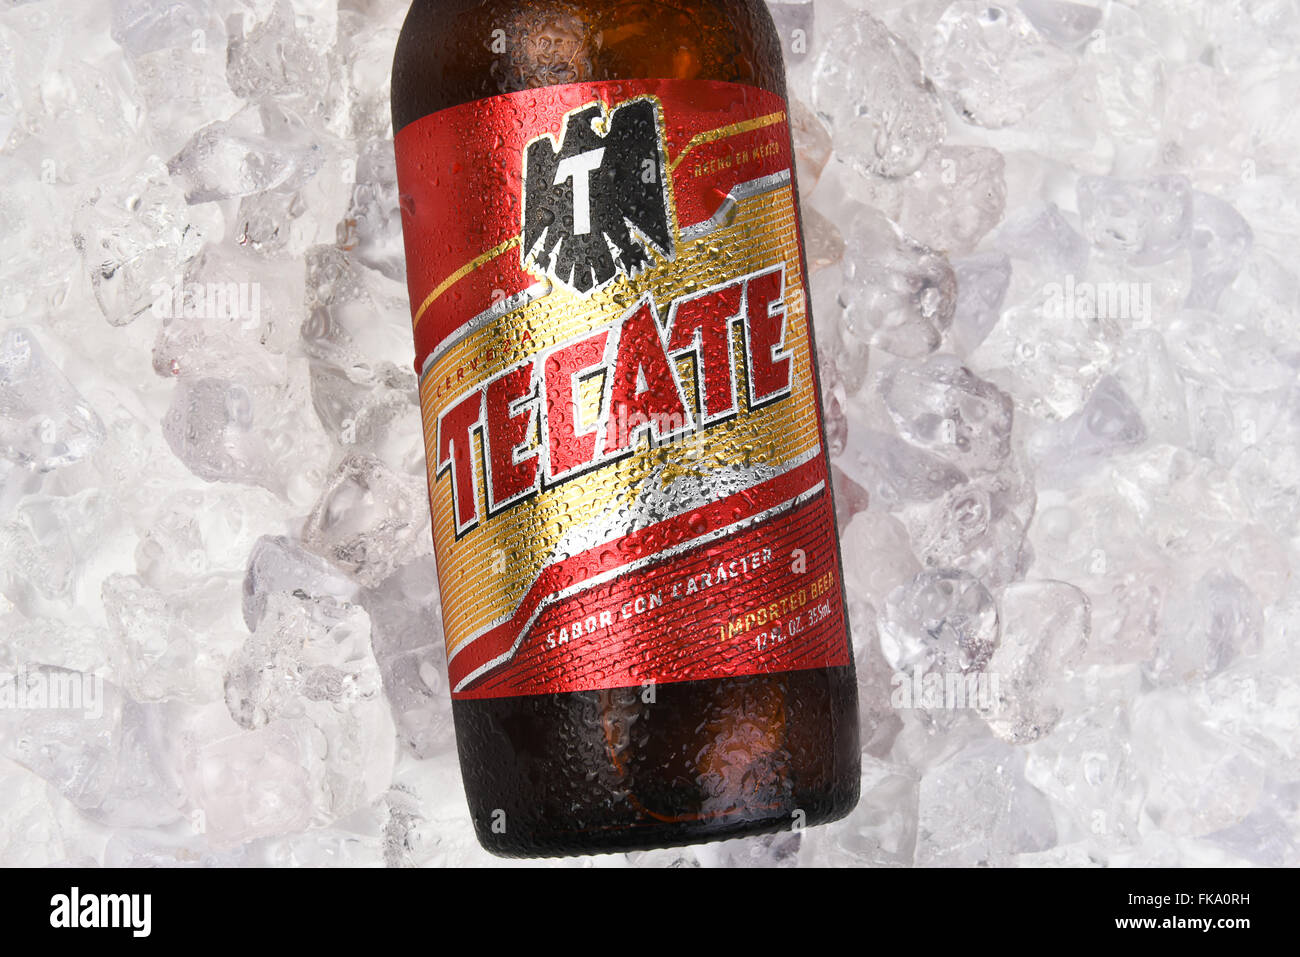 Tecate Beer Bottle on a bed of ice, Horizontal format closeup of the label. Stock Photo